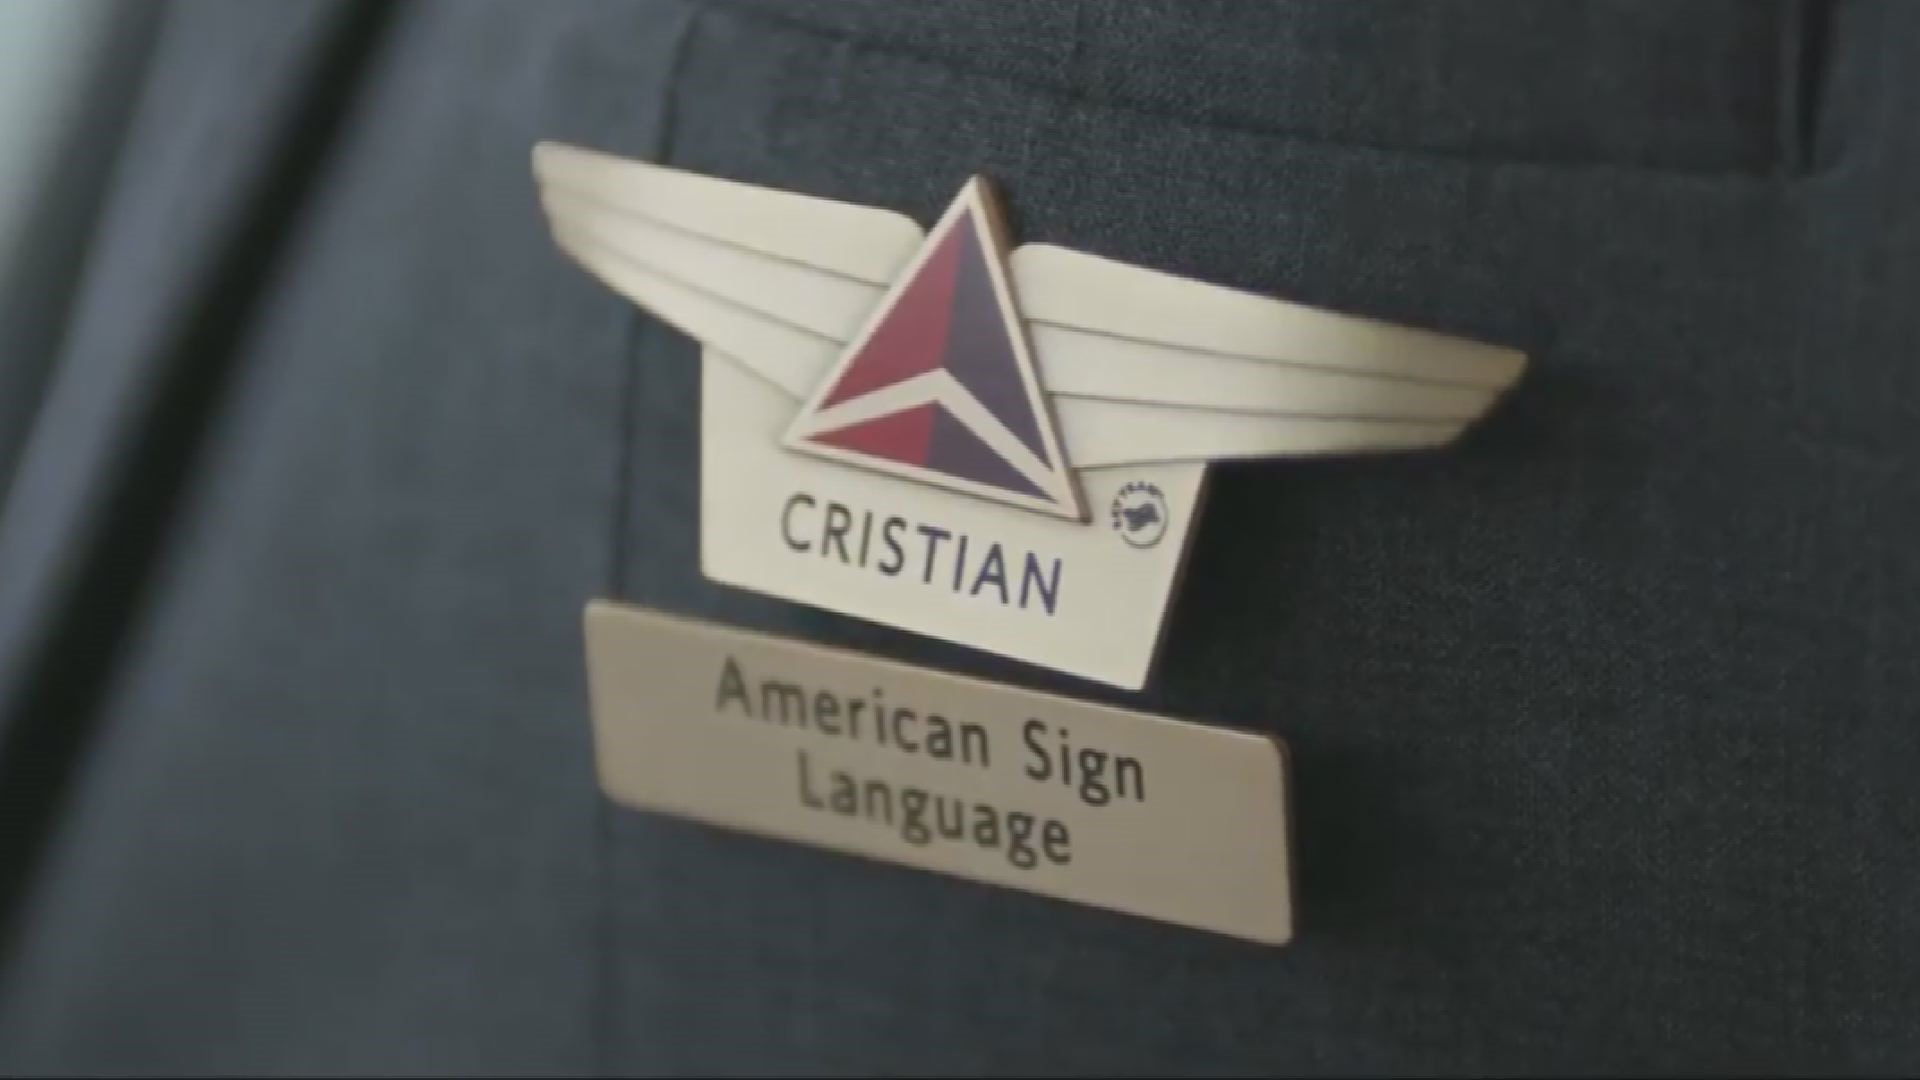 The company announced that it is creating a new language bar pin that employees can wear on their uniform, notifying the deaf and hard-of-hearing they can communicate in American Sign Language and the more than 300 other signed languages from around the world.